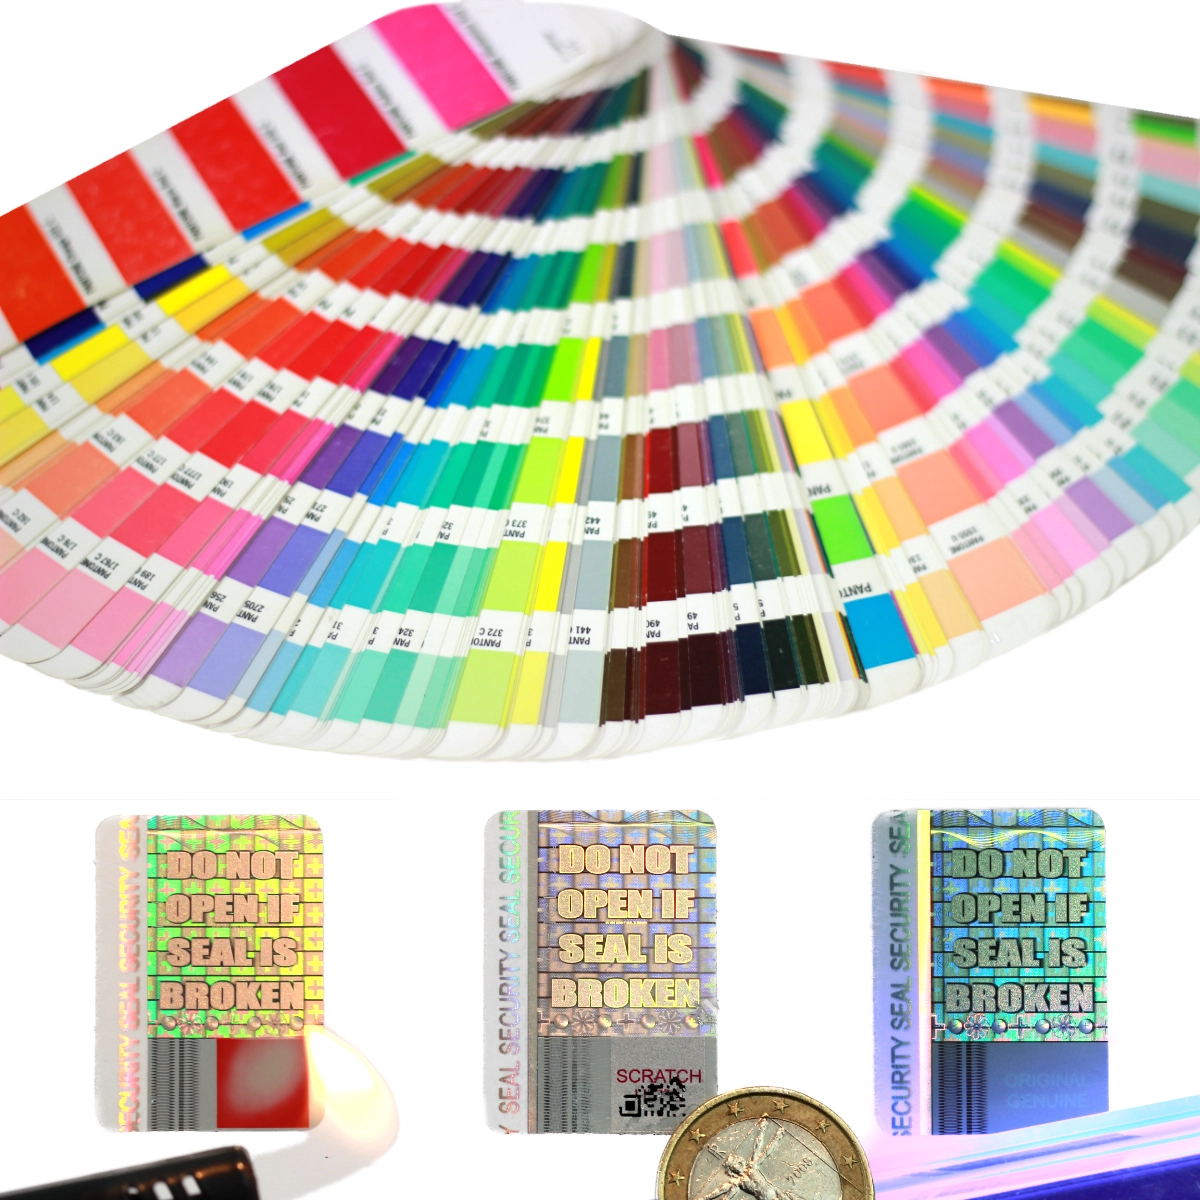 SECURITY PIGMENTS AND SPECIAL PRINTING in hologram label as additional security feature in many different colors